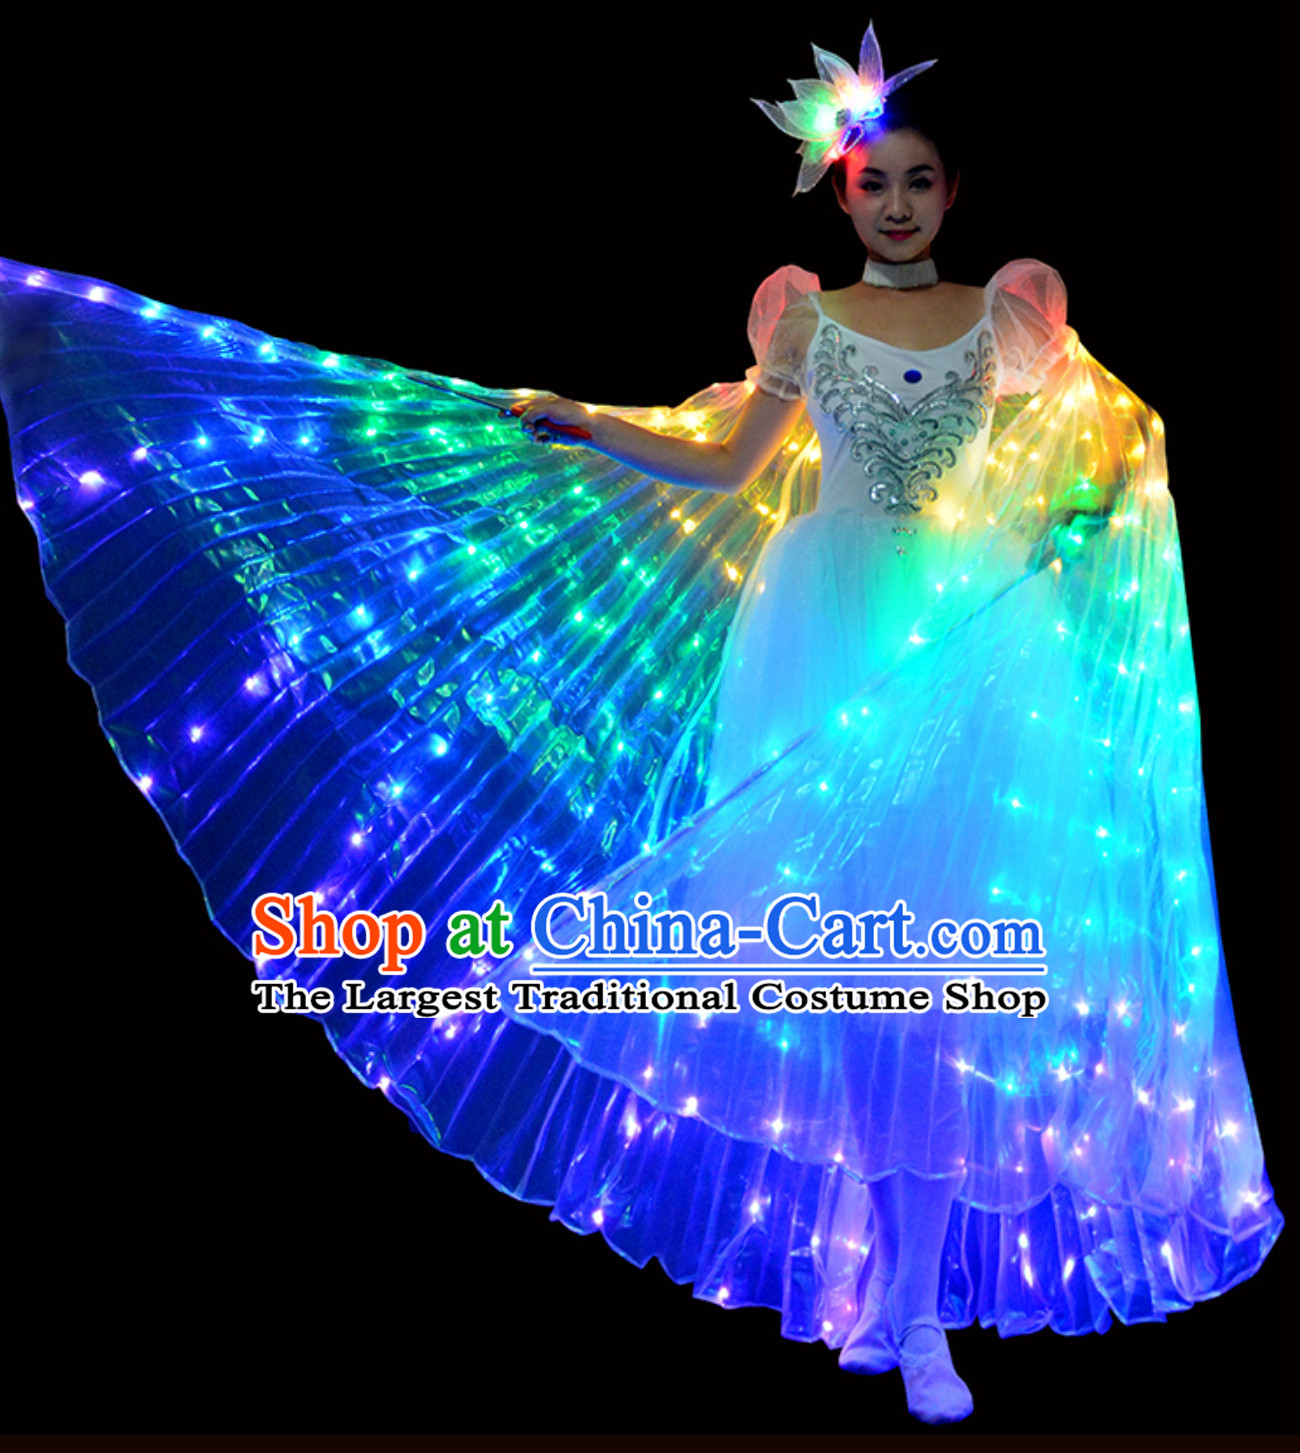 LED Lights Luminous Giant Wings Butterfly Dance Costumes and Head Wear Complete Set